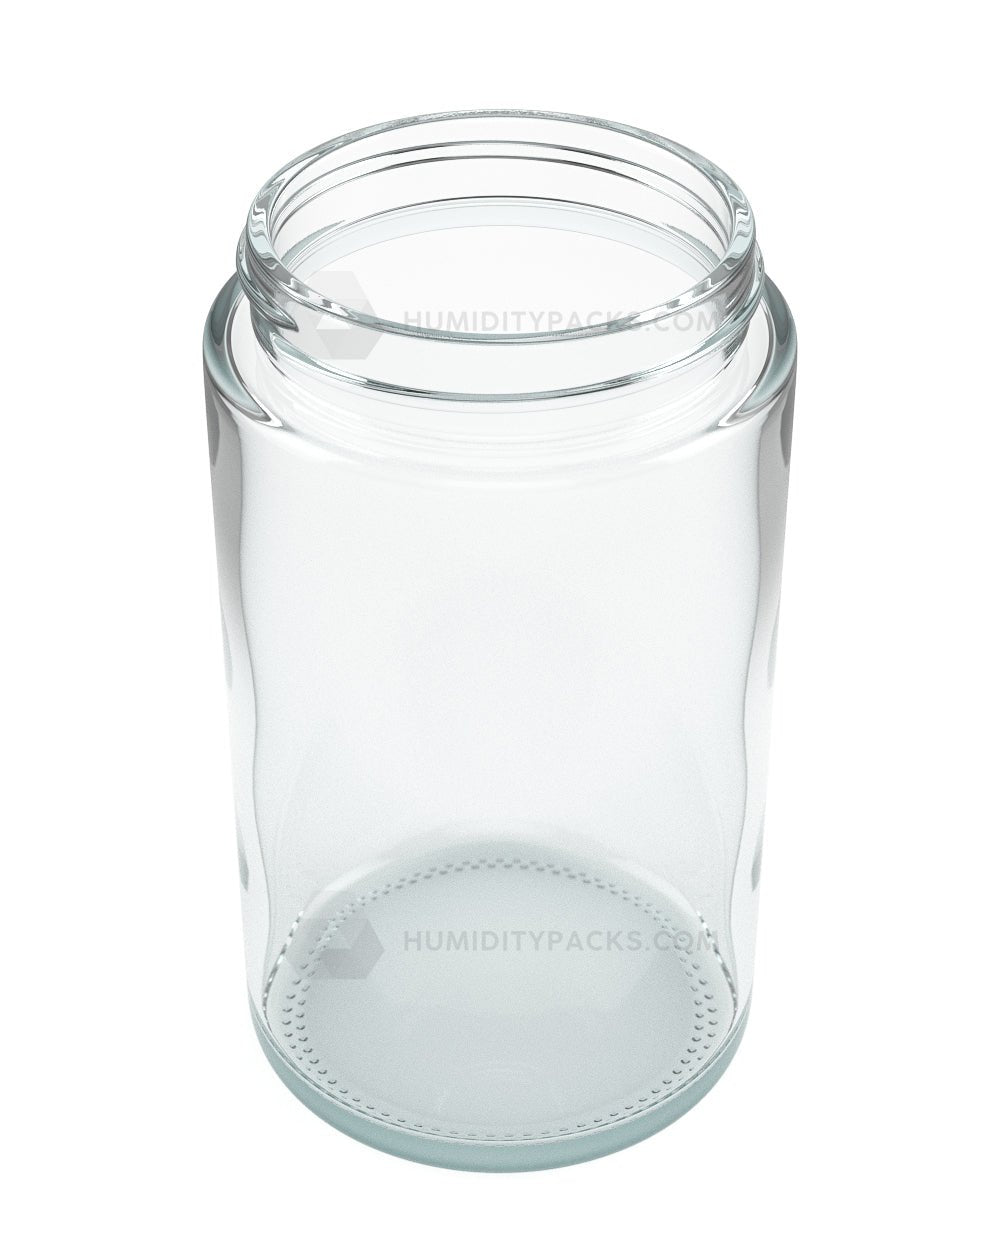 4 oz Straight Sided Glass Jar 3-Pack Shipping Box